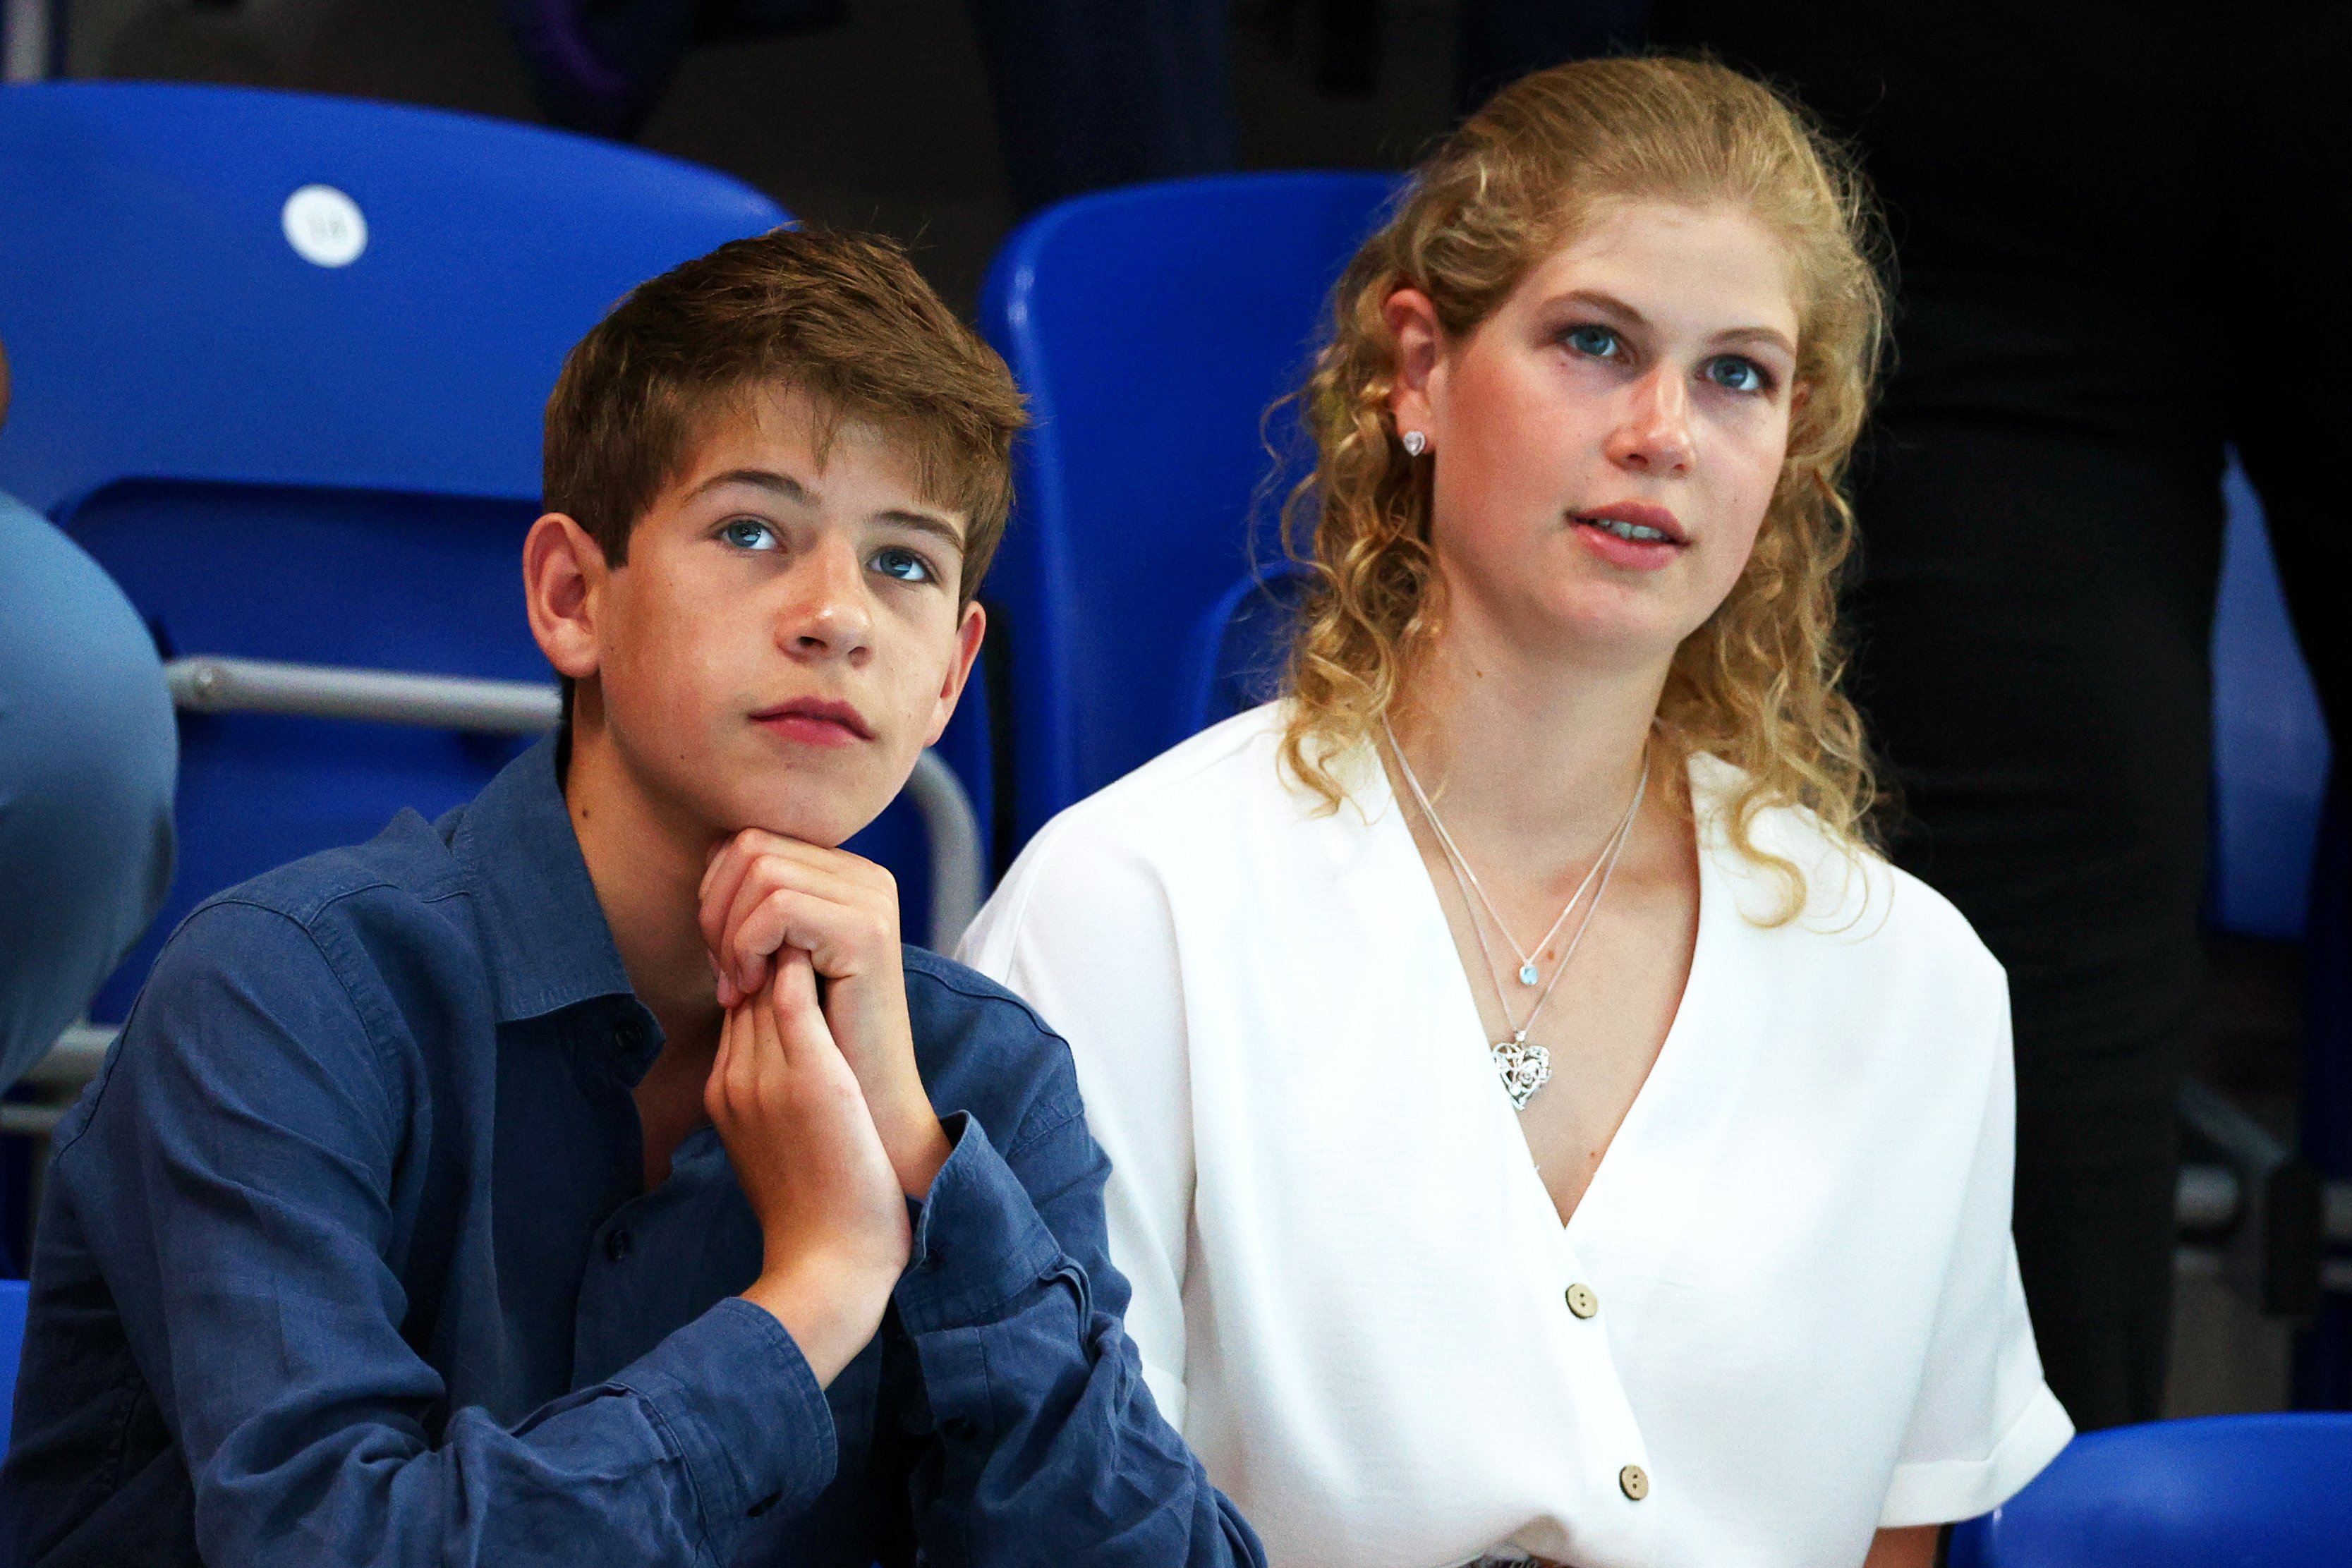 James, Viscount Severn und Lady Louise Windsor im Sandwell Aquatics Centre am 02. August 2022 in Smethwick, England | Quelle: Getty Images